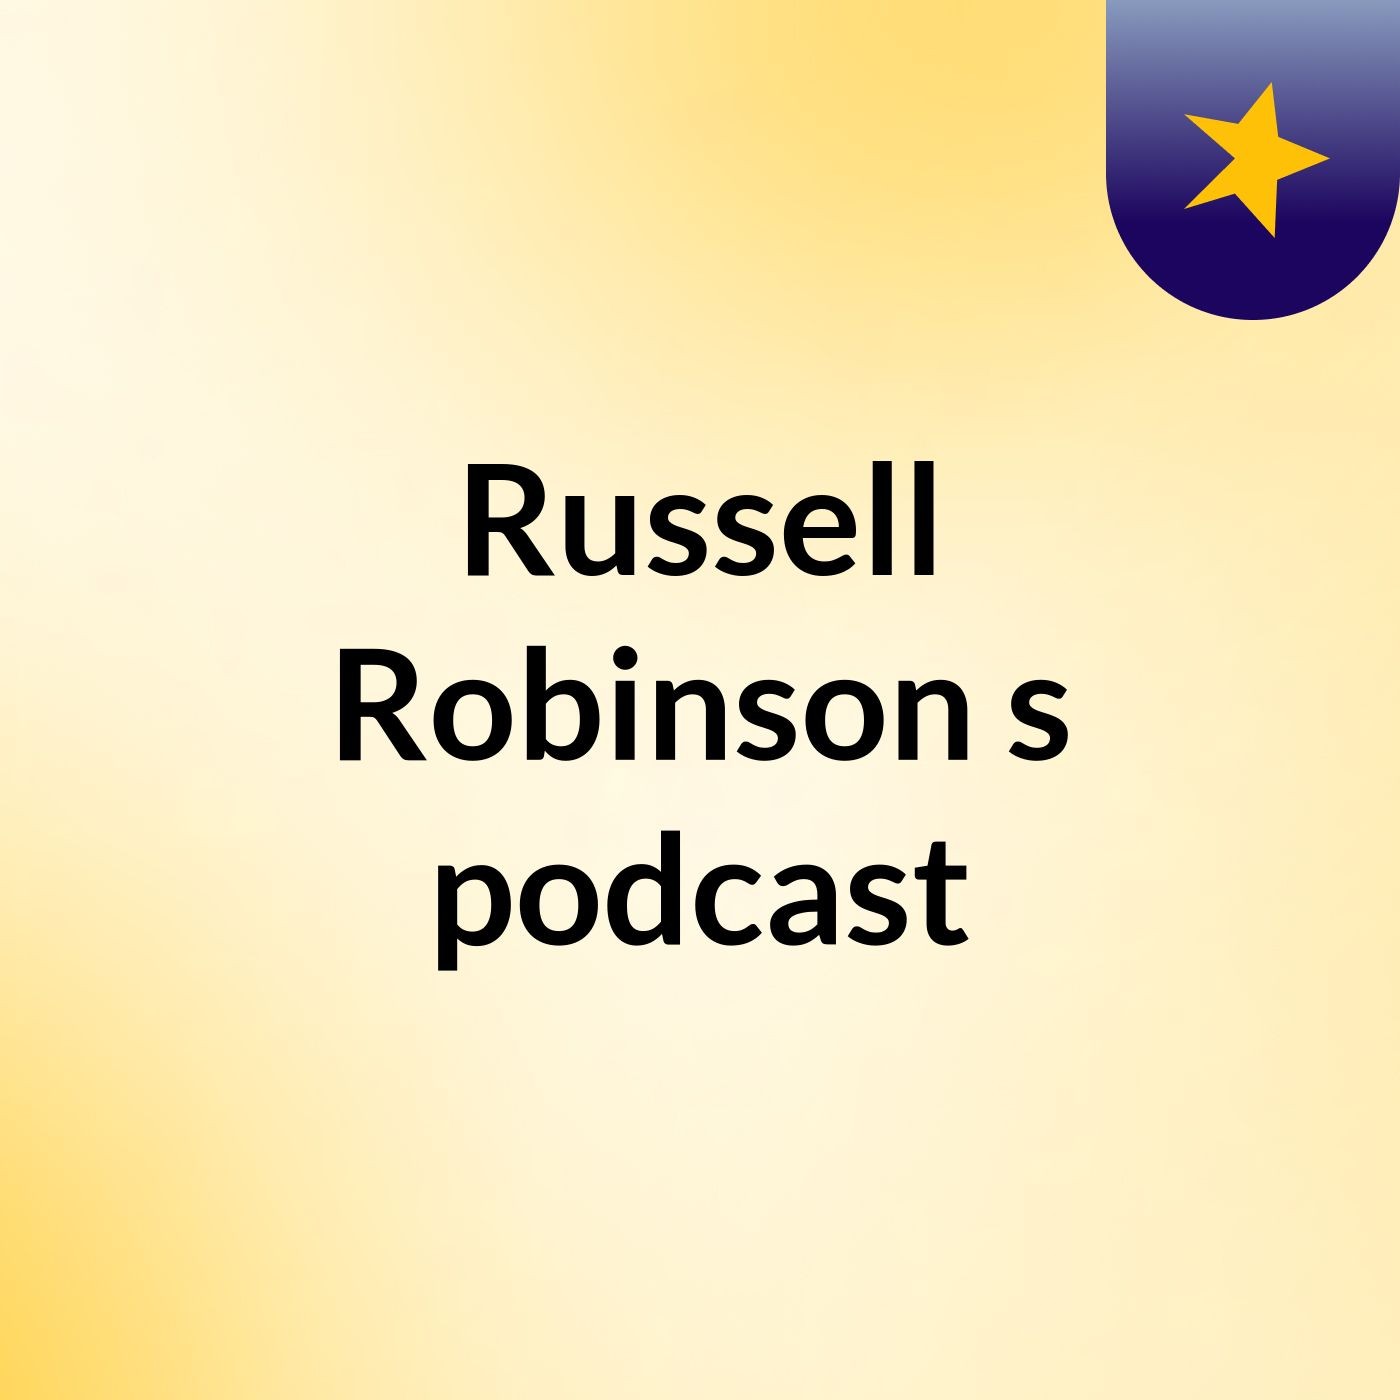 Episode 3 - Russell Robinson's podcast